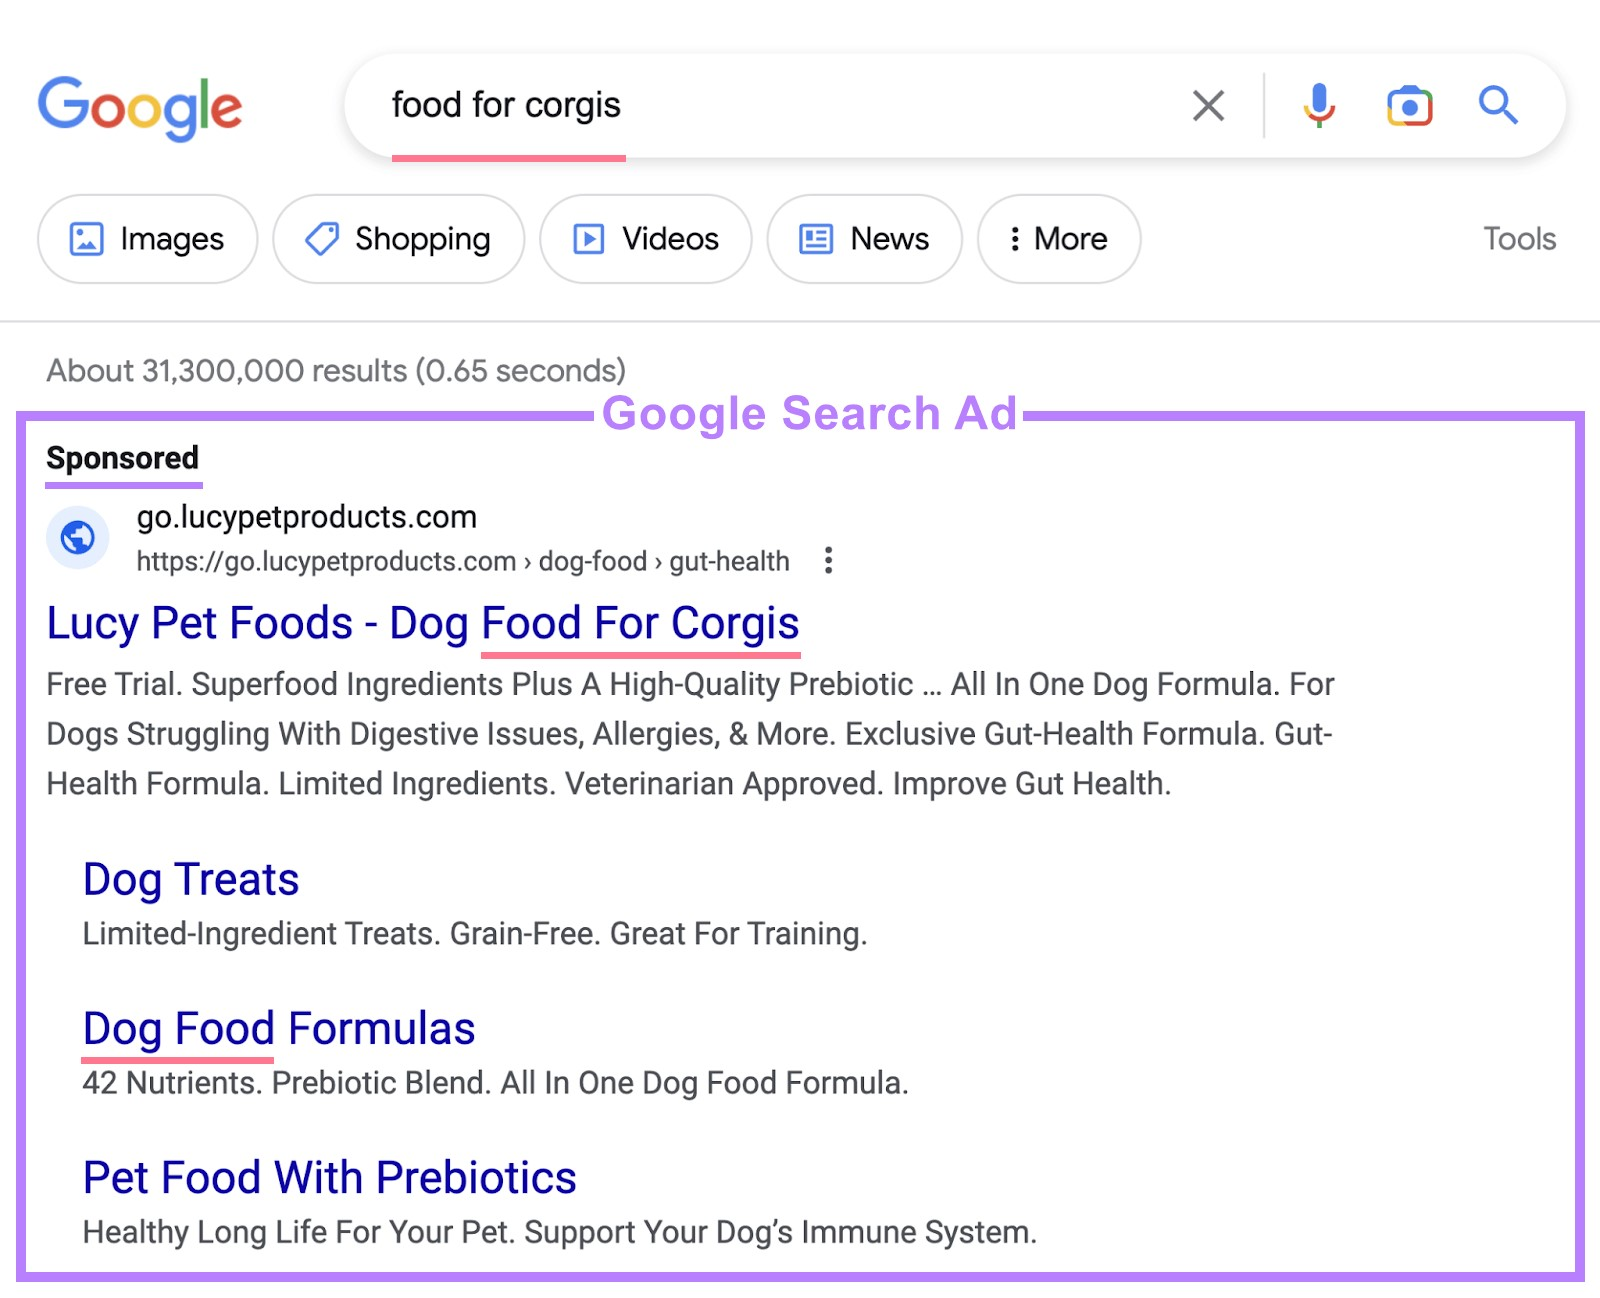 Google Search Ad for dog food on SERP